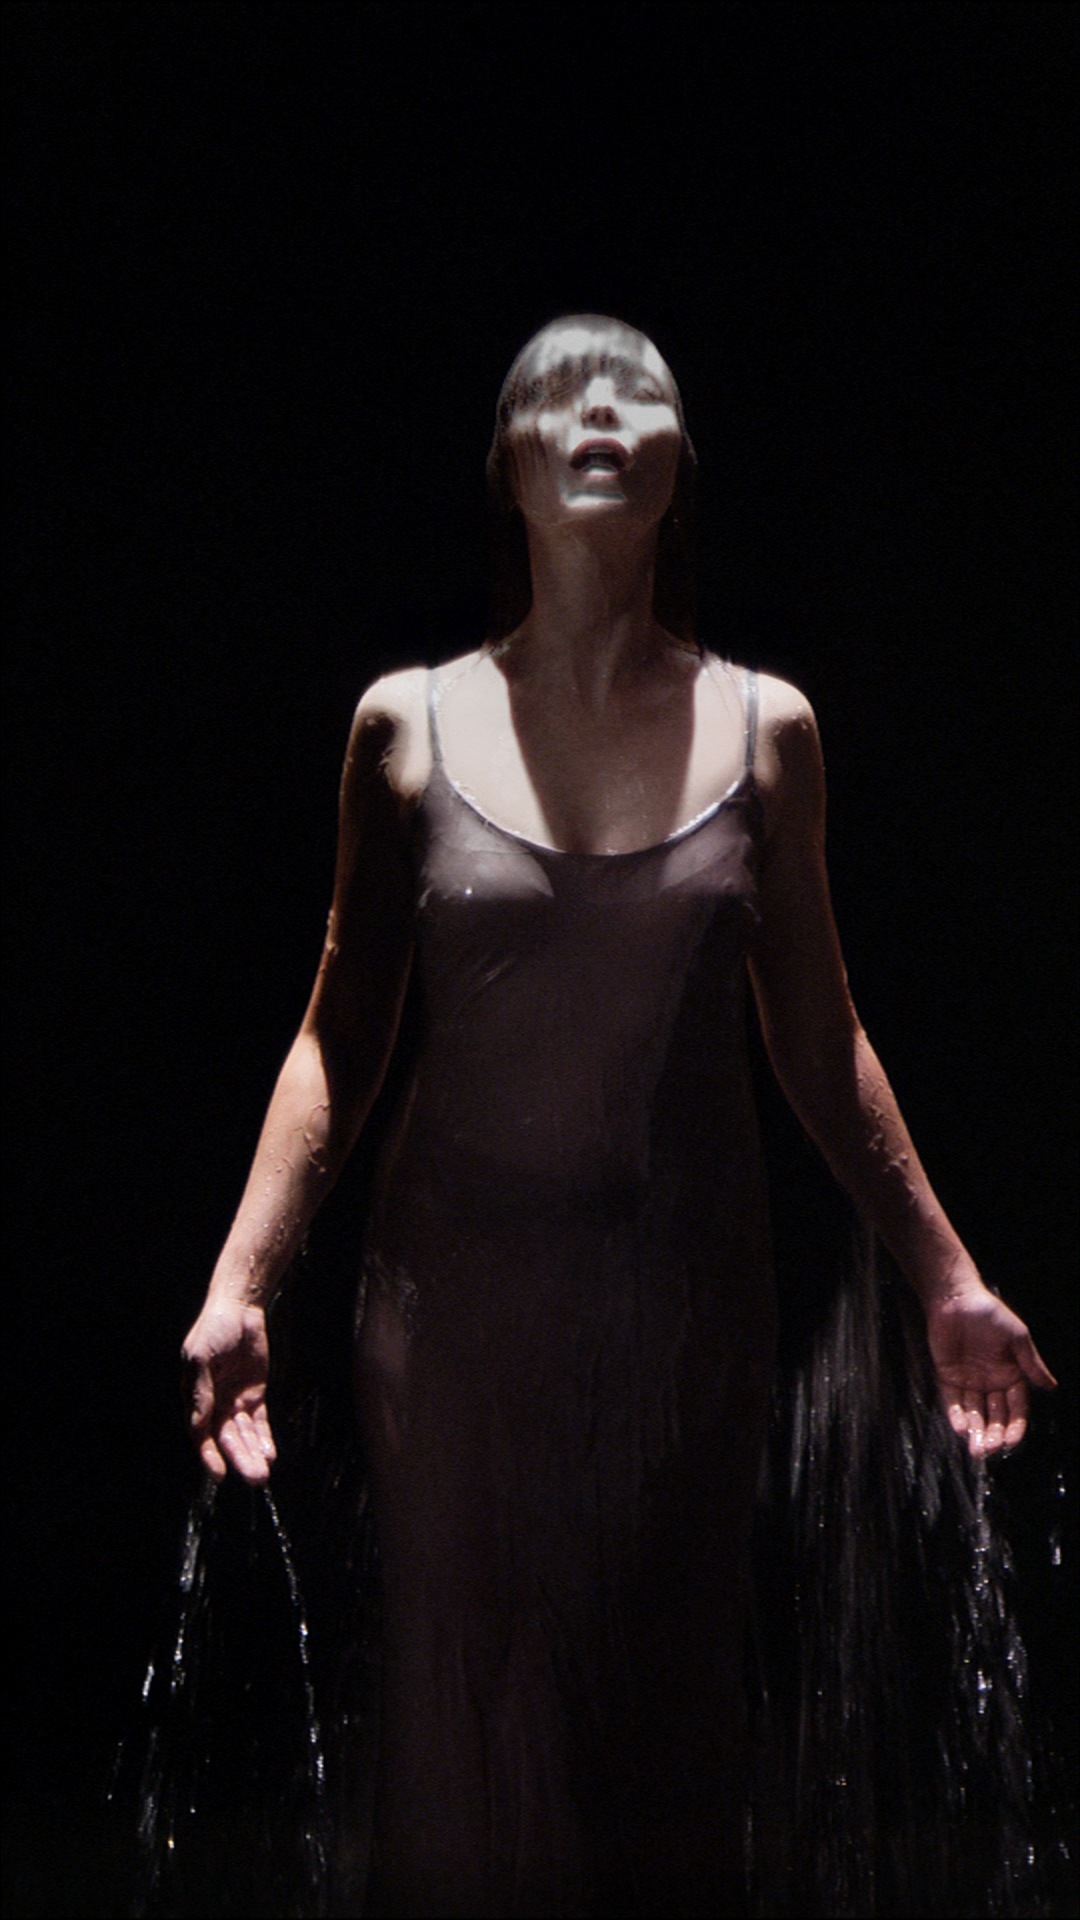 8_Bill Viola, Ocean WIthout a Shore [detail], 2007, High-definition ...